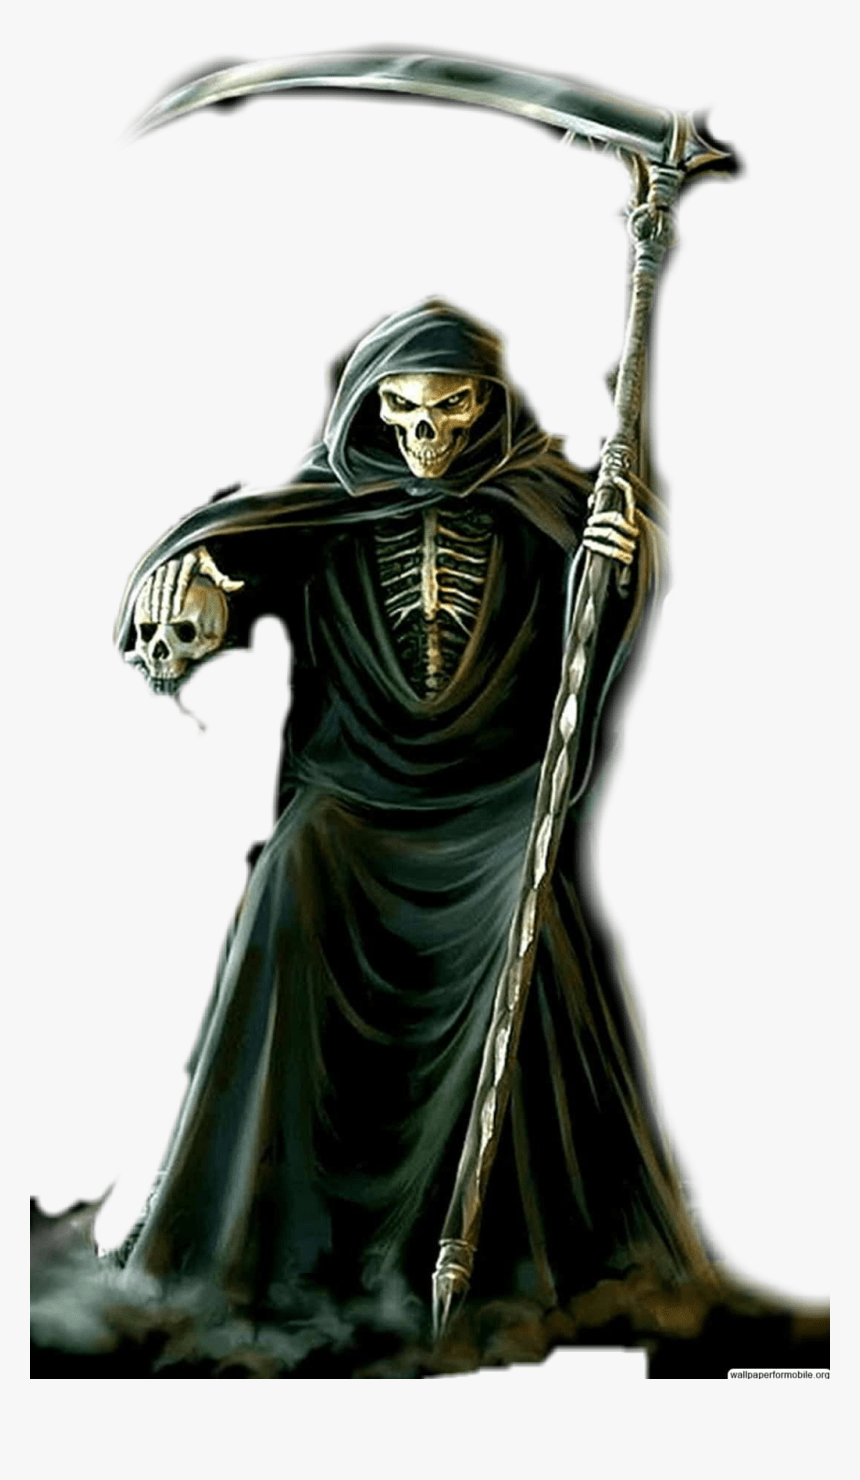 Statue Of A Skeleton With Gold Wings On It Background Pictures Of The Santa  Muerte Background Image And Wallpaper for Free Download